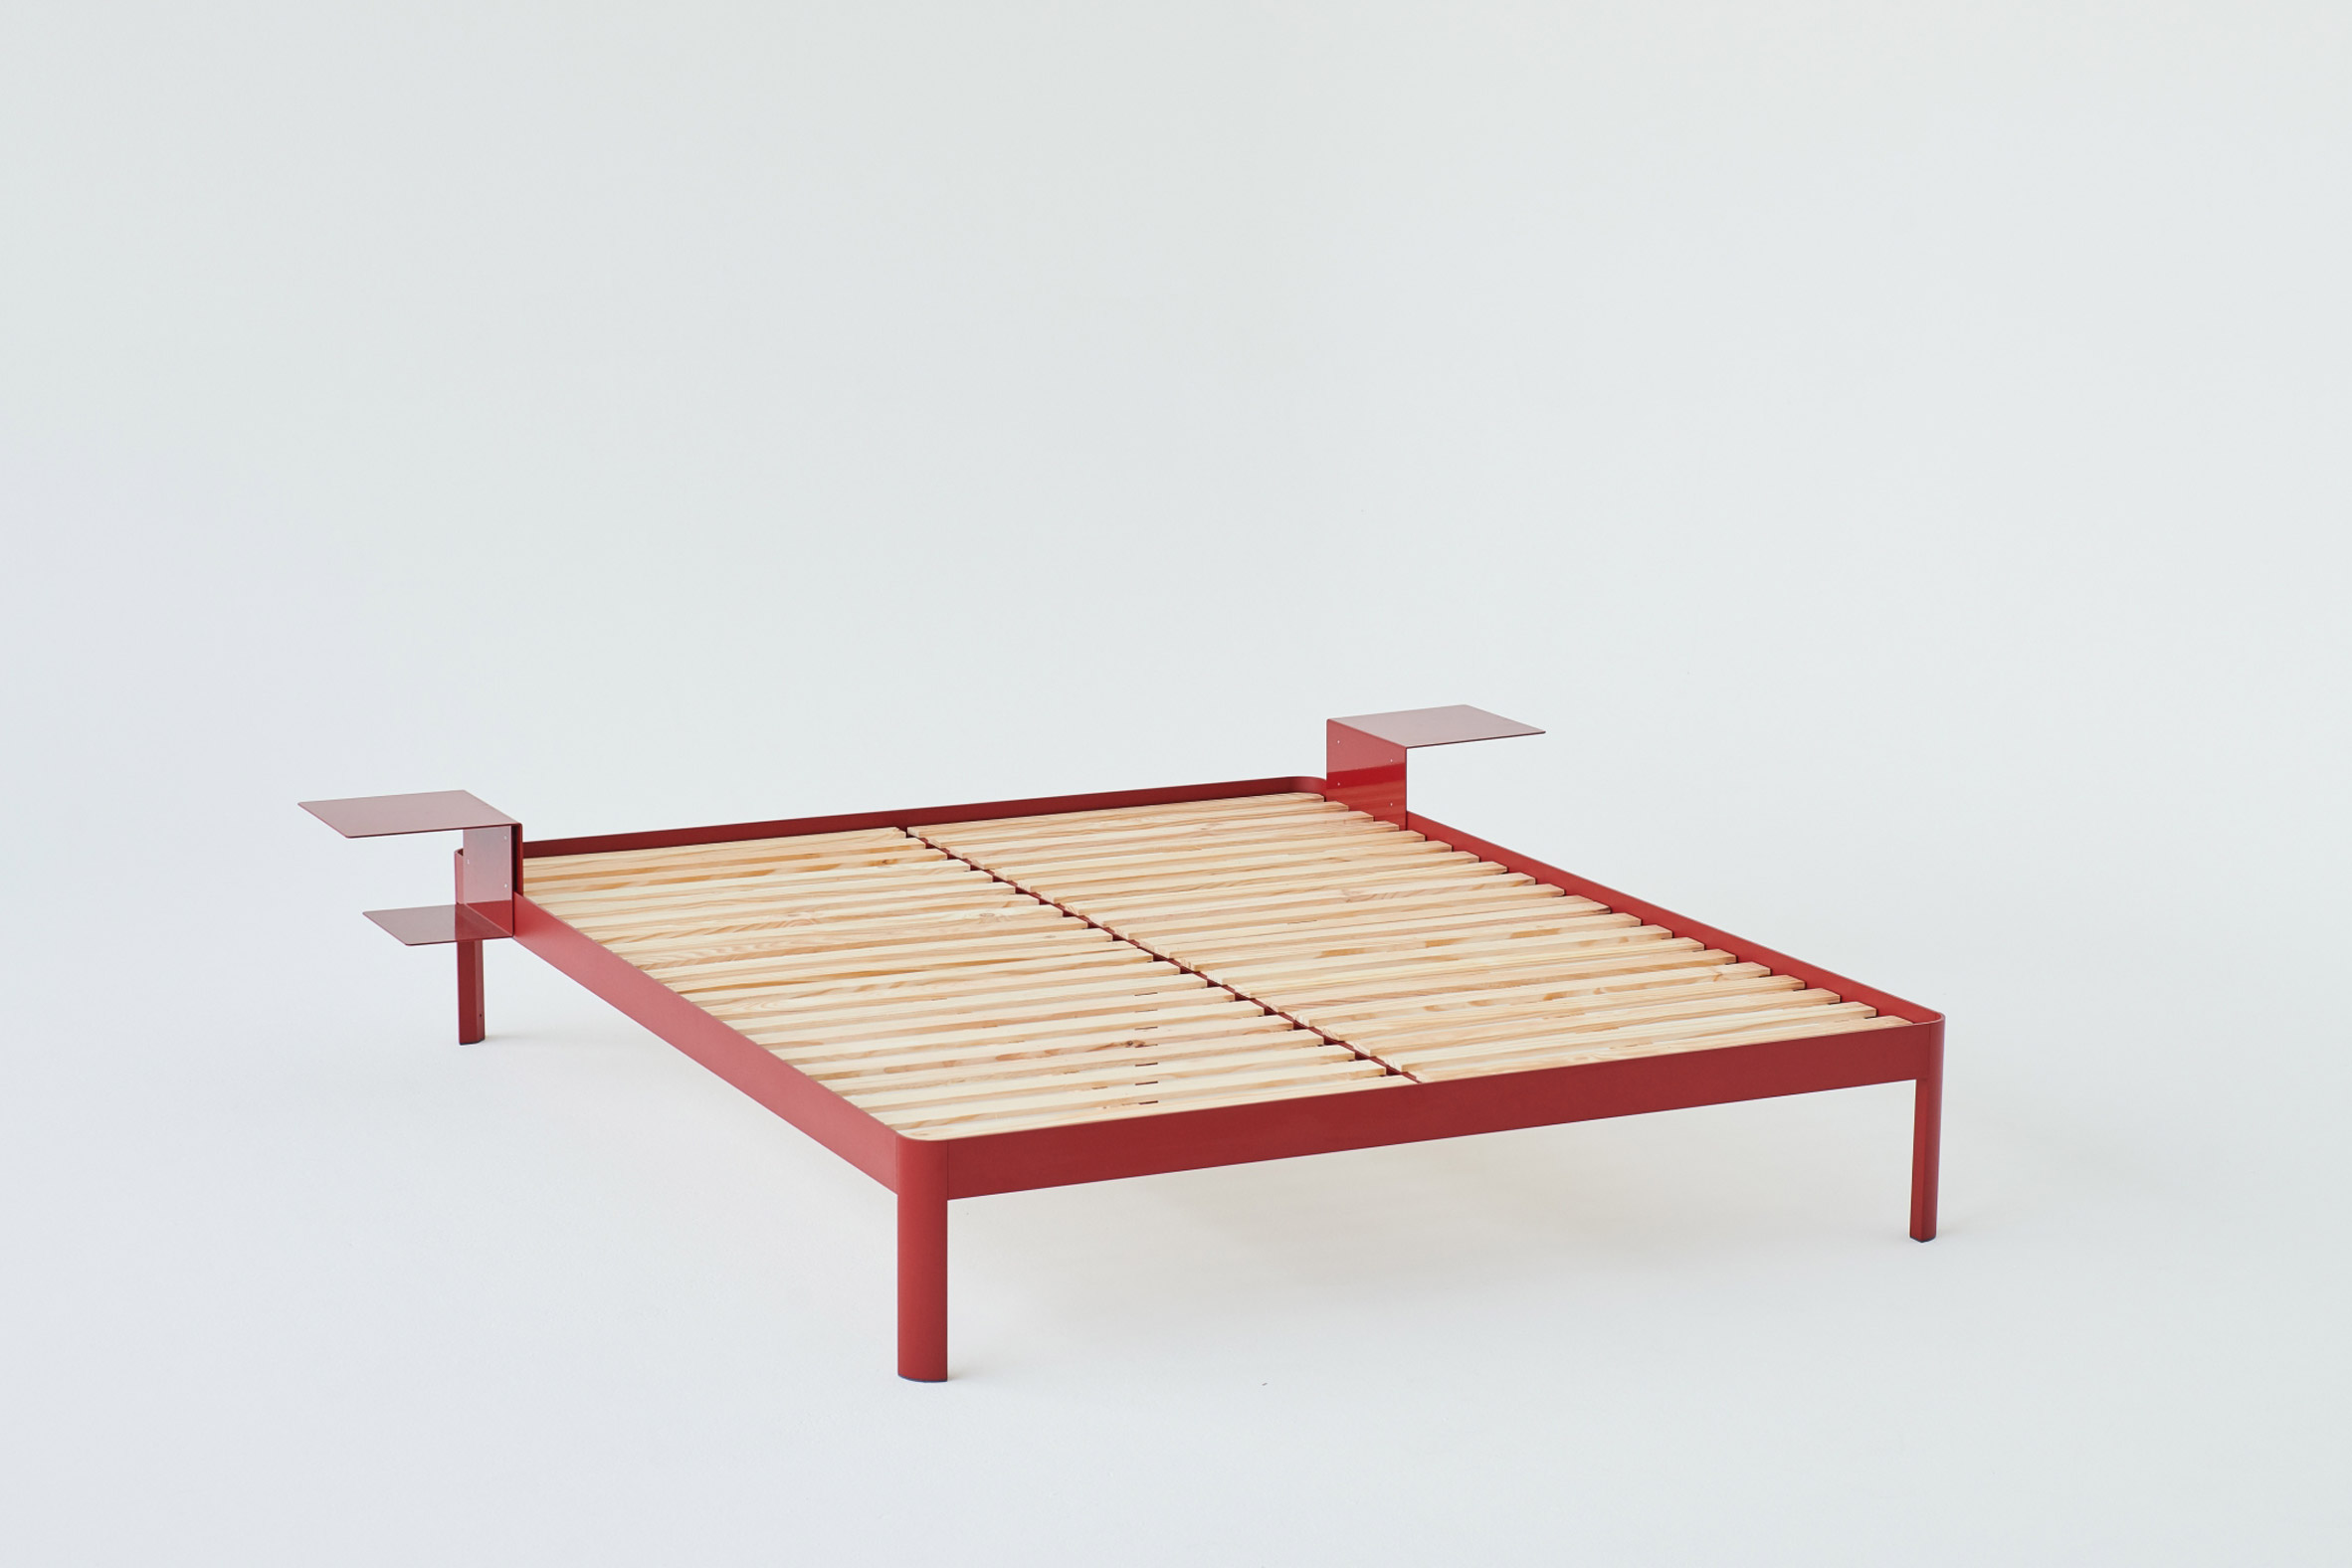 Photograph of a red bed frame with two side tables in a white background